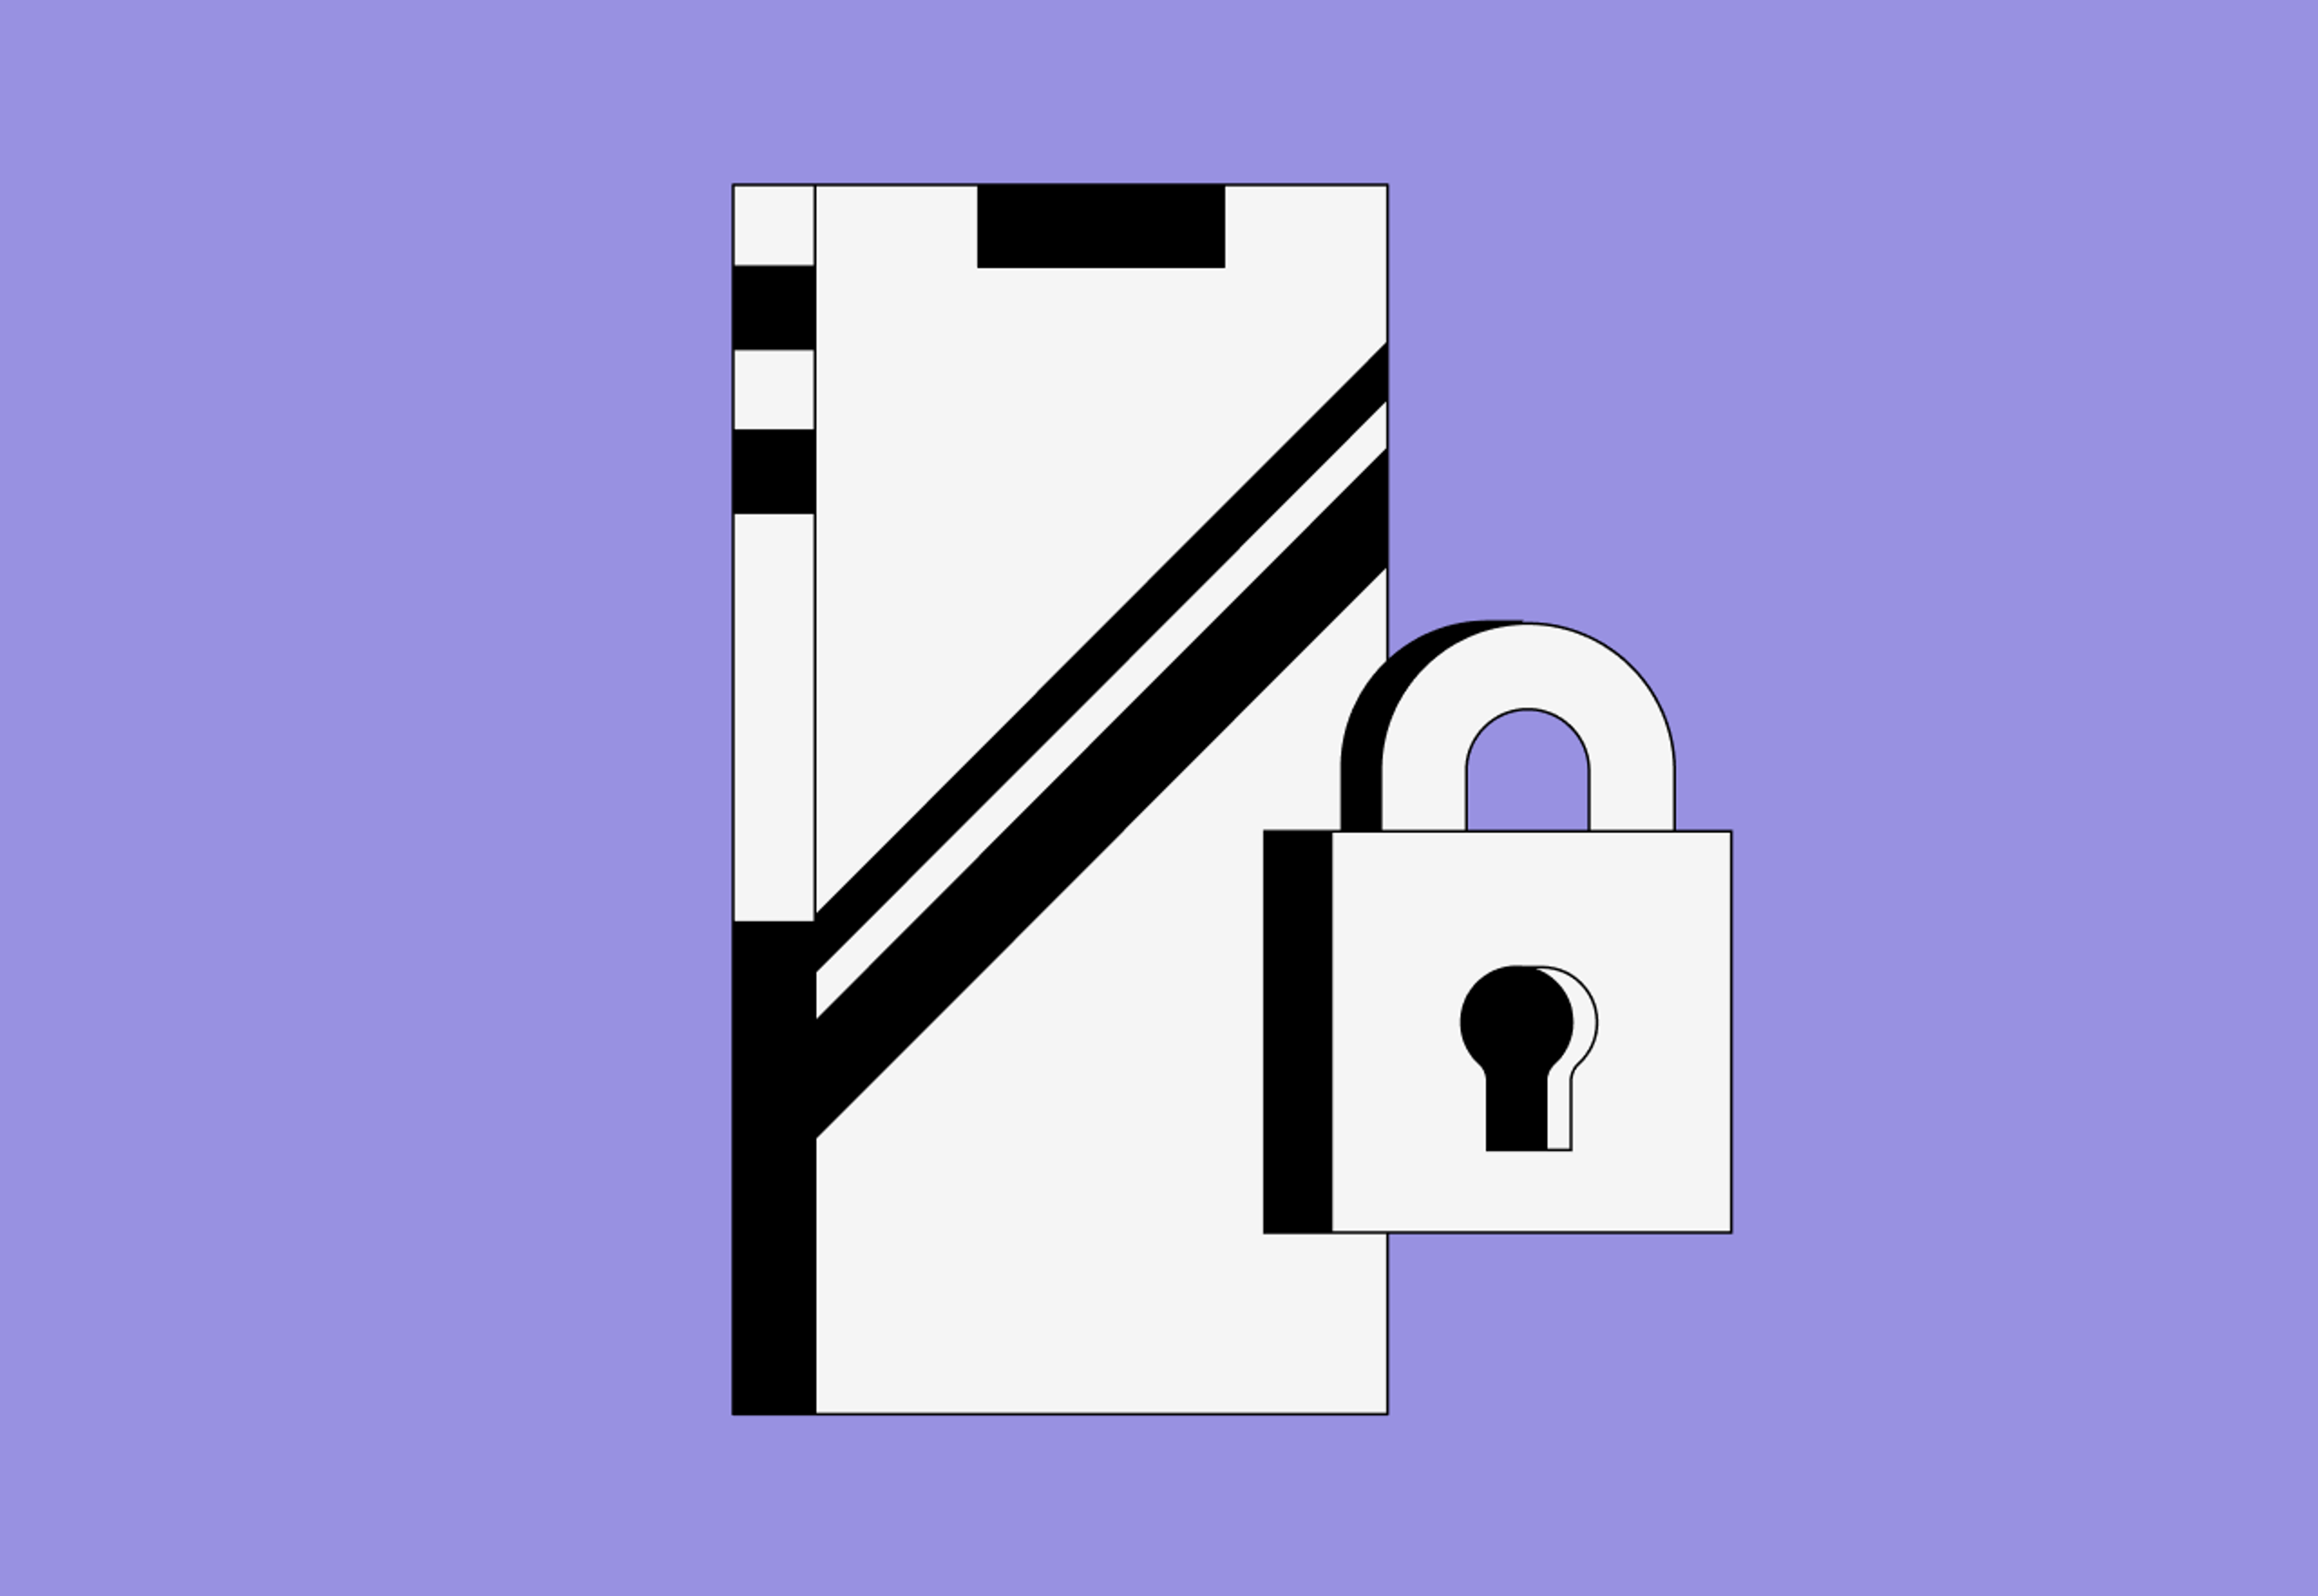 An illustration of a phone with a lock